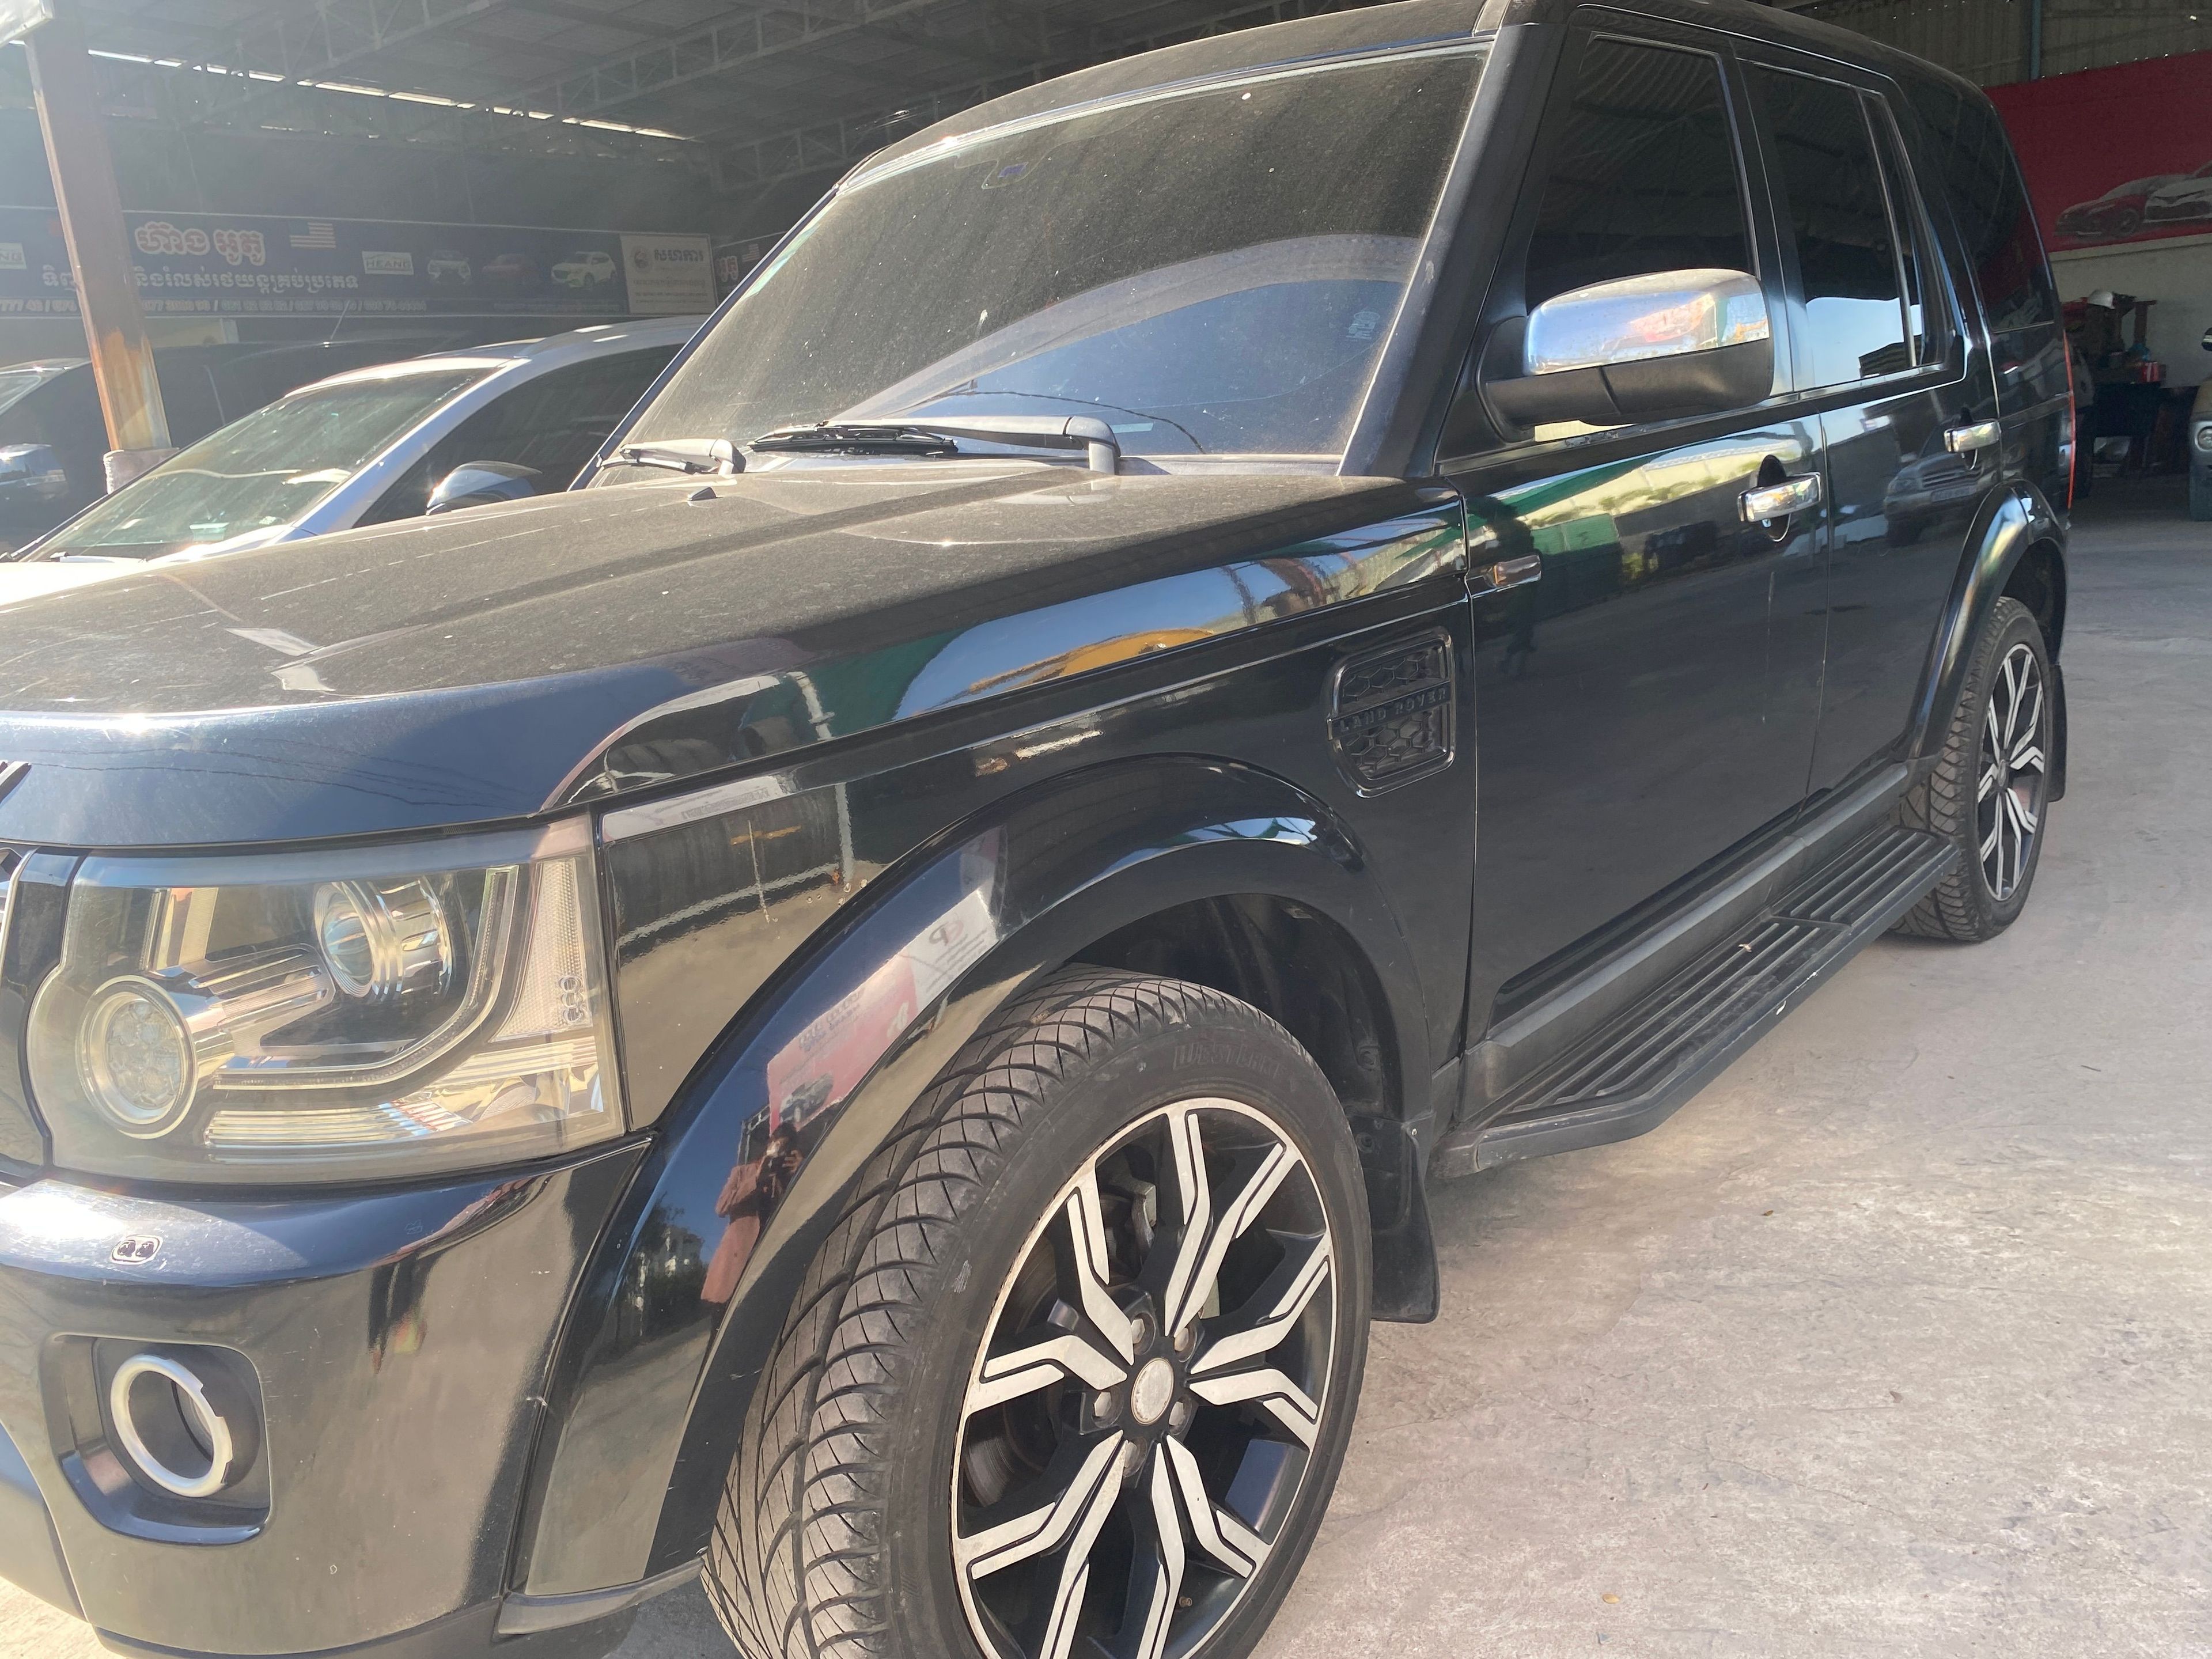 Land Rover Discovery 2005